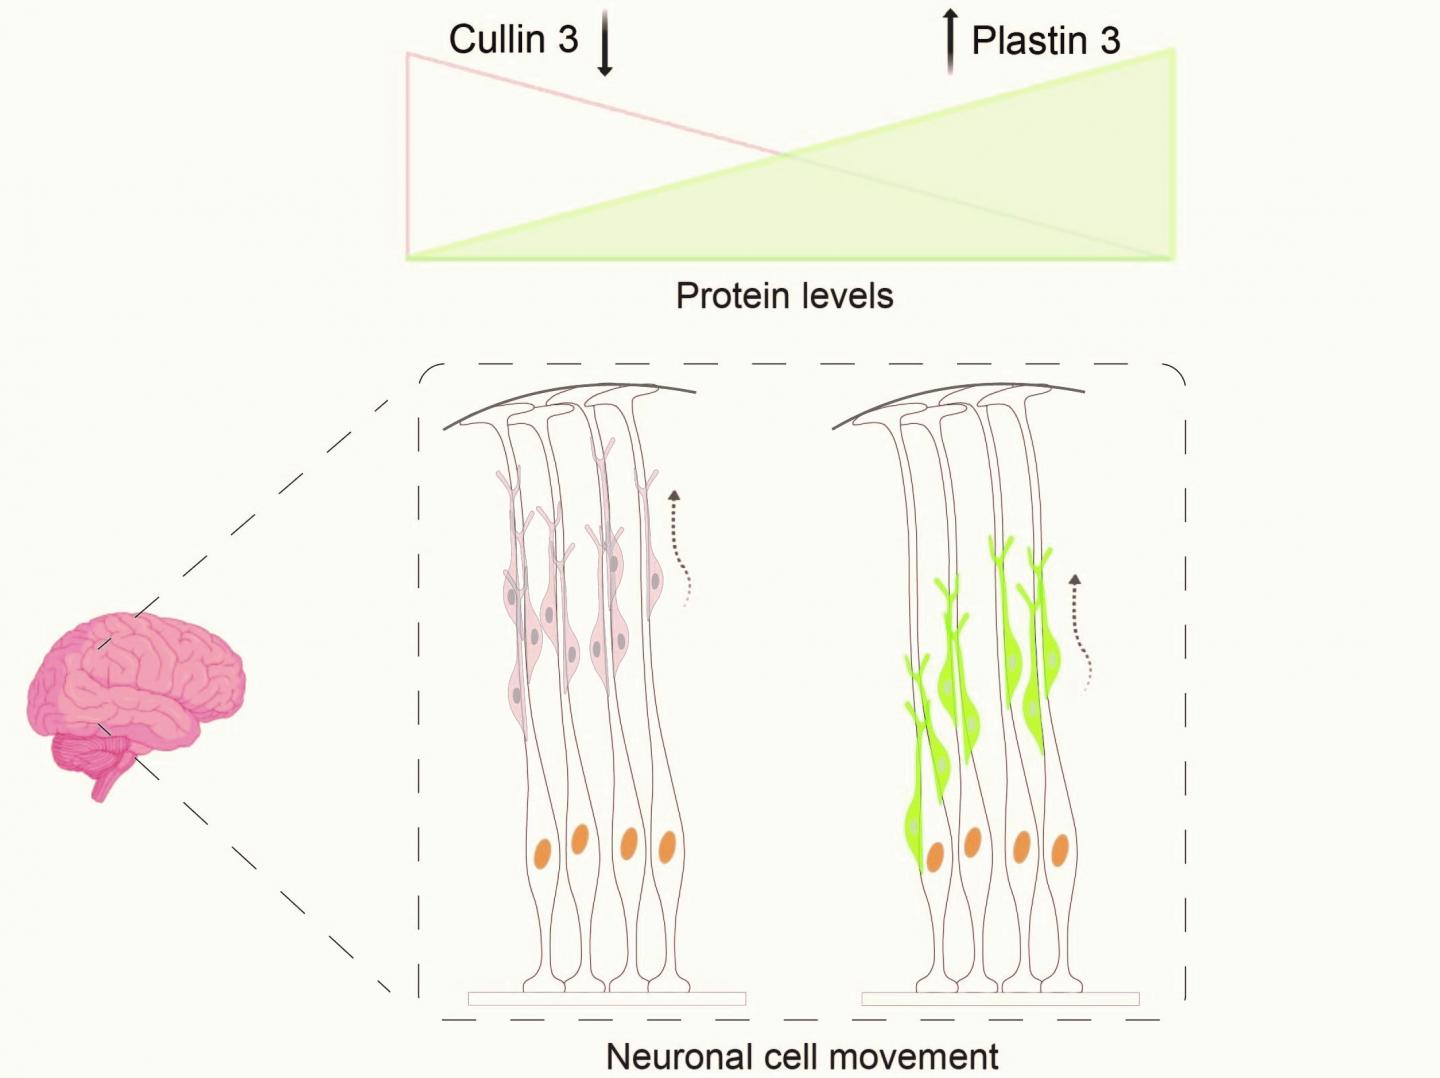 Defective Cullin 3 gene leads to accumulation of Plastin 3 protein